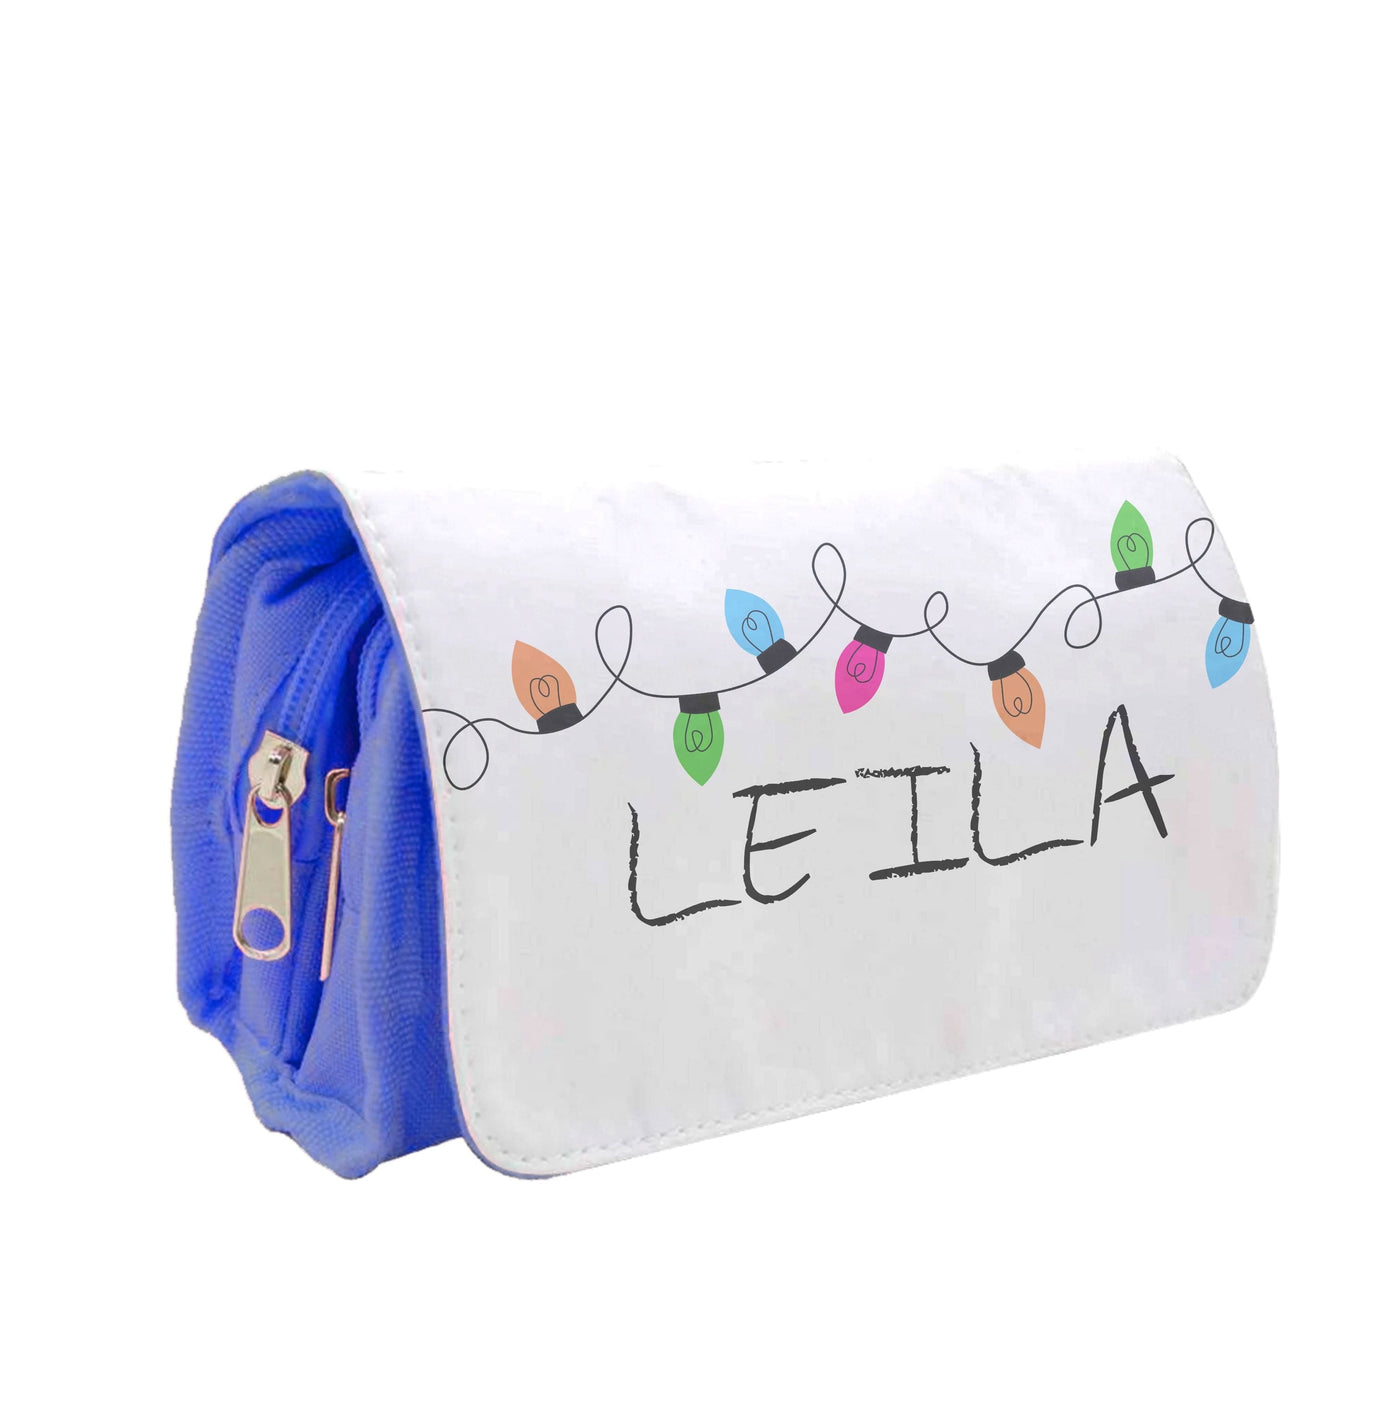 Fairy Lights - Personalised Stranger Things Pencil Case